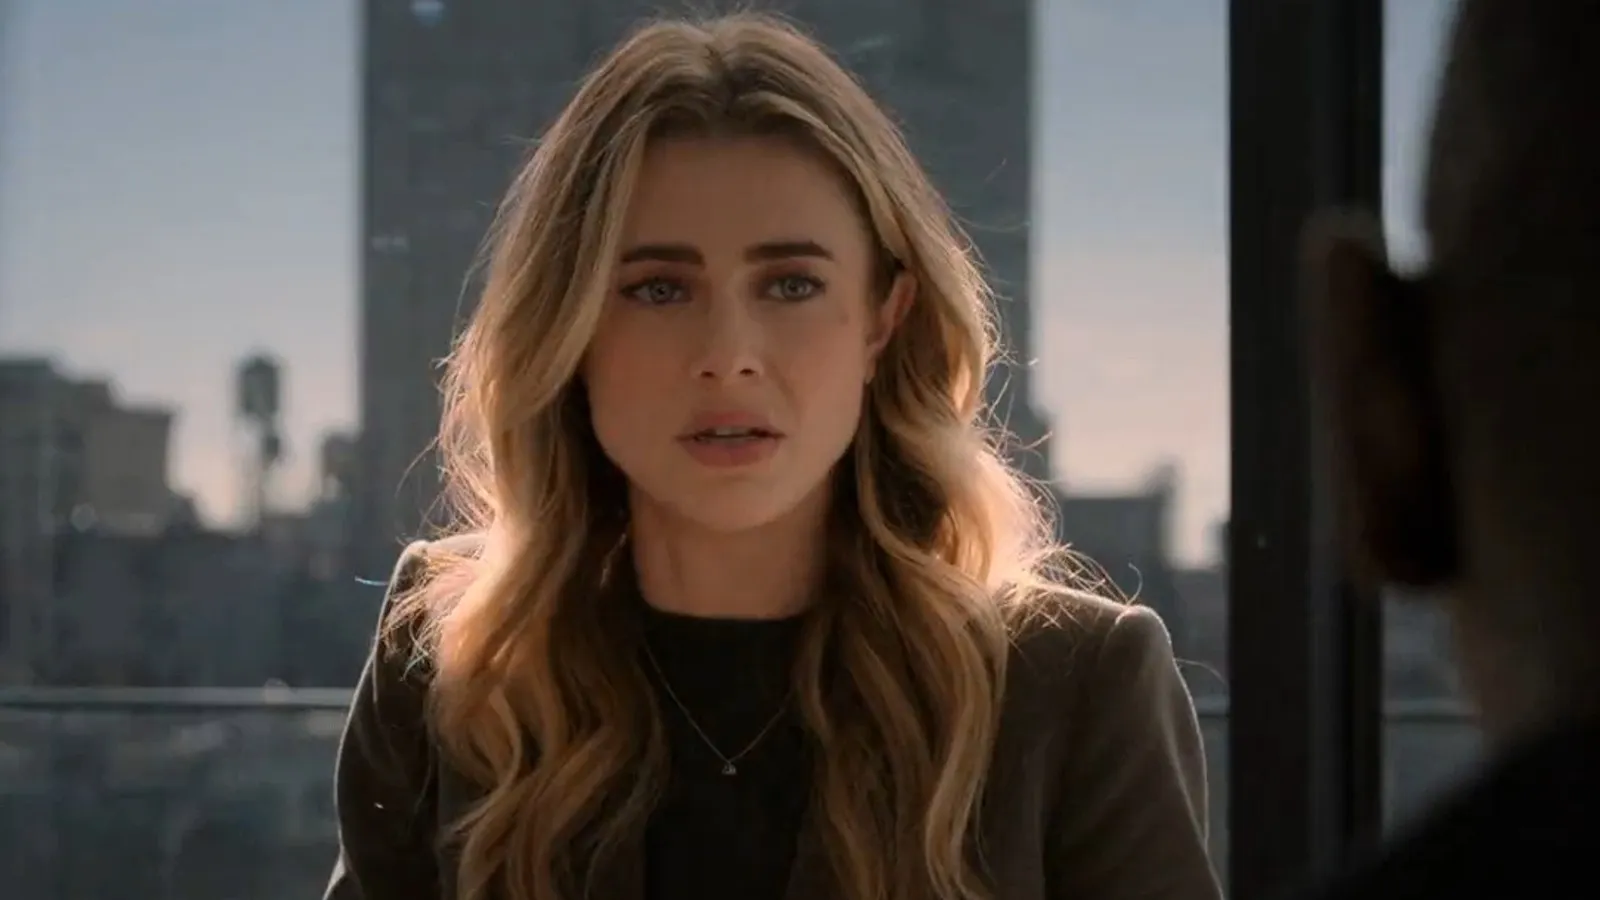 Manifest' Season 3: When It Starts and How to Watch Online